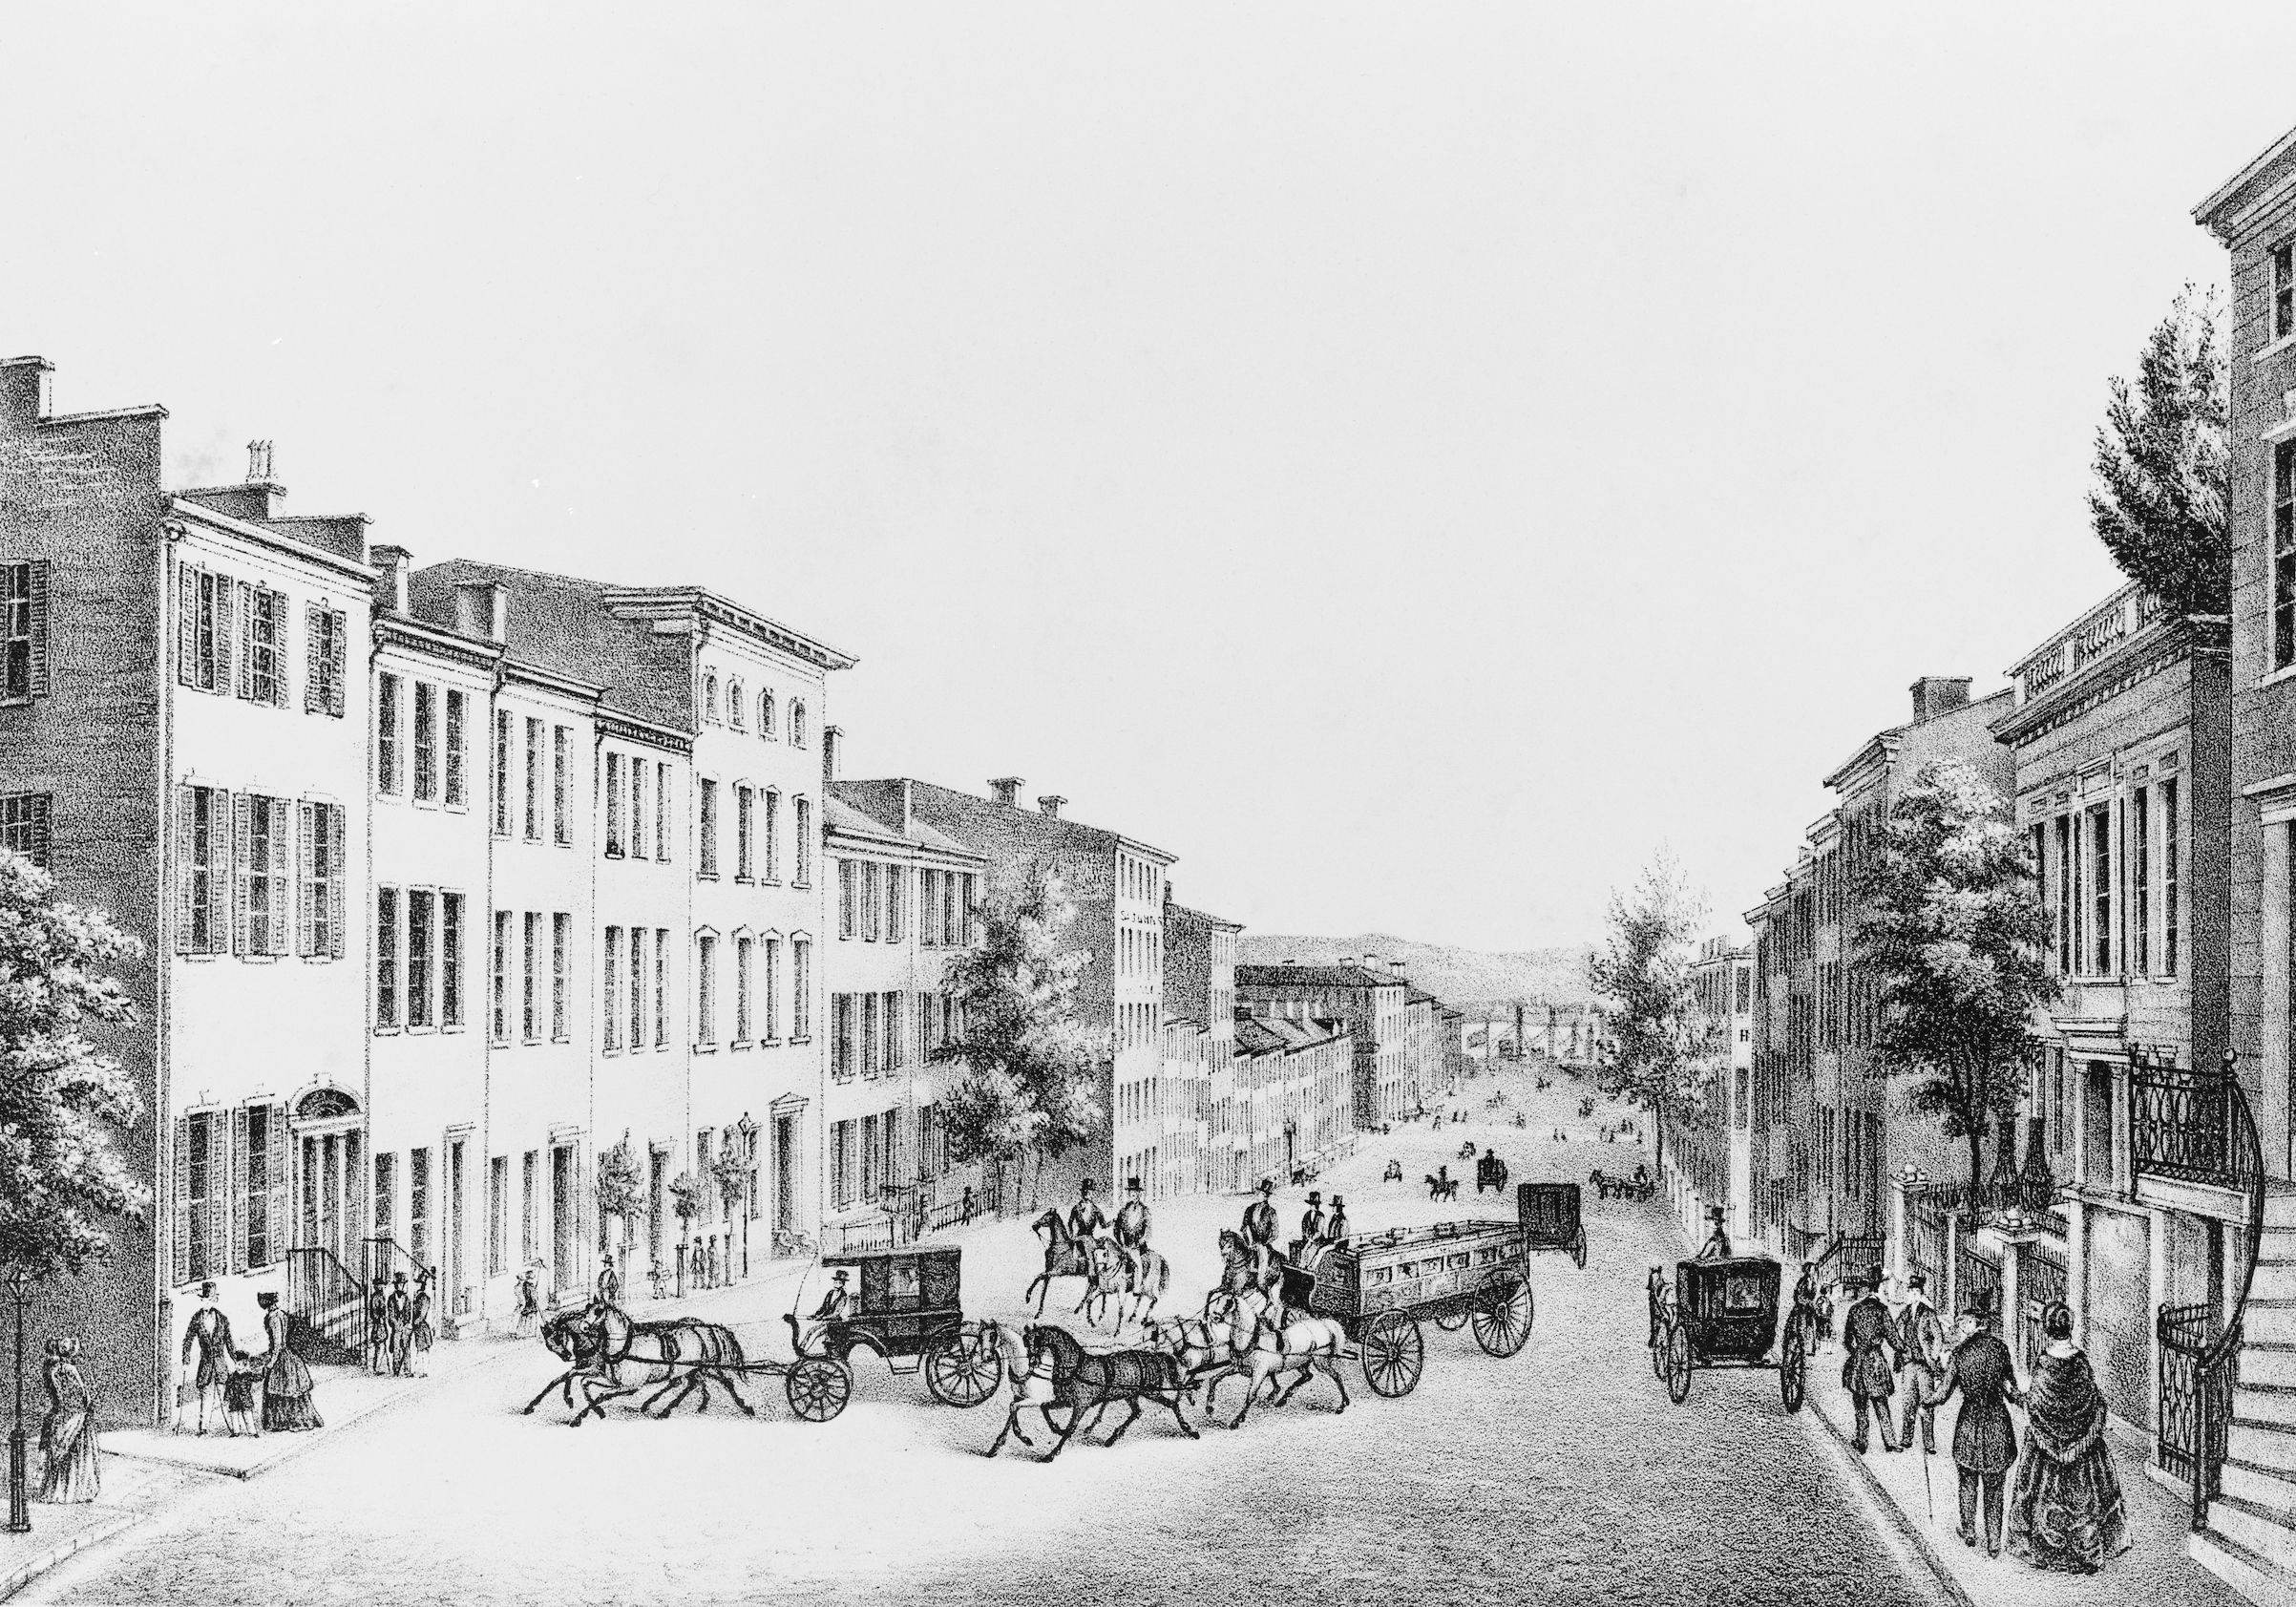 A lithograph depicting Lower Broadway in New York City in the 1830s (Bettmann Archive/Getty Images)